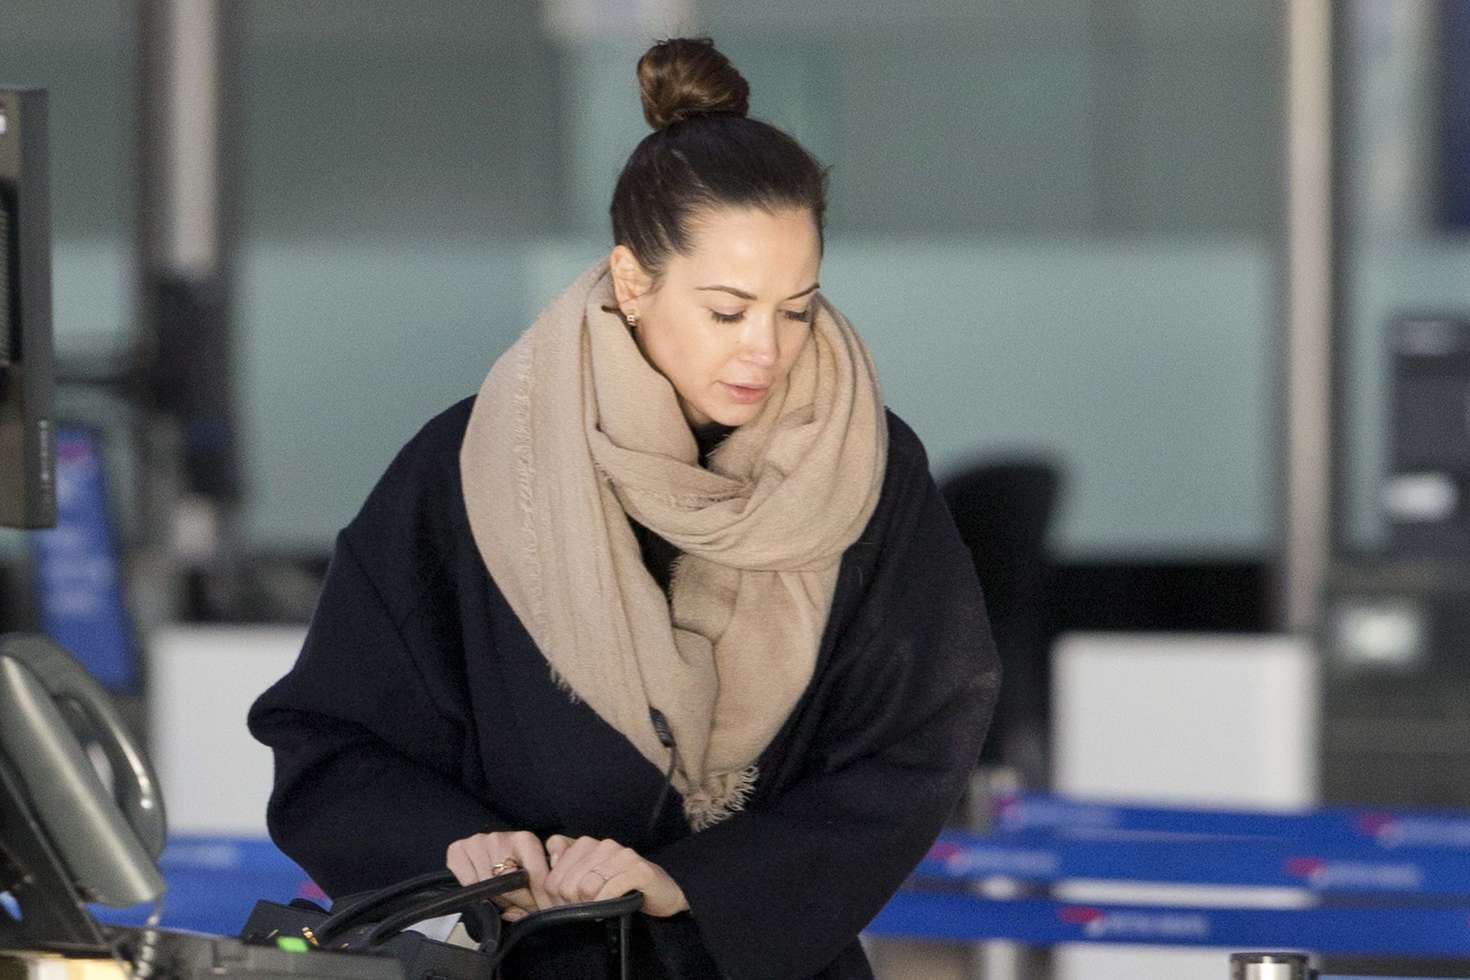 Mandy Capristo at Heathrow Airport in London